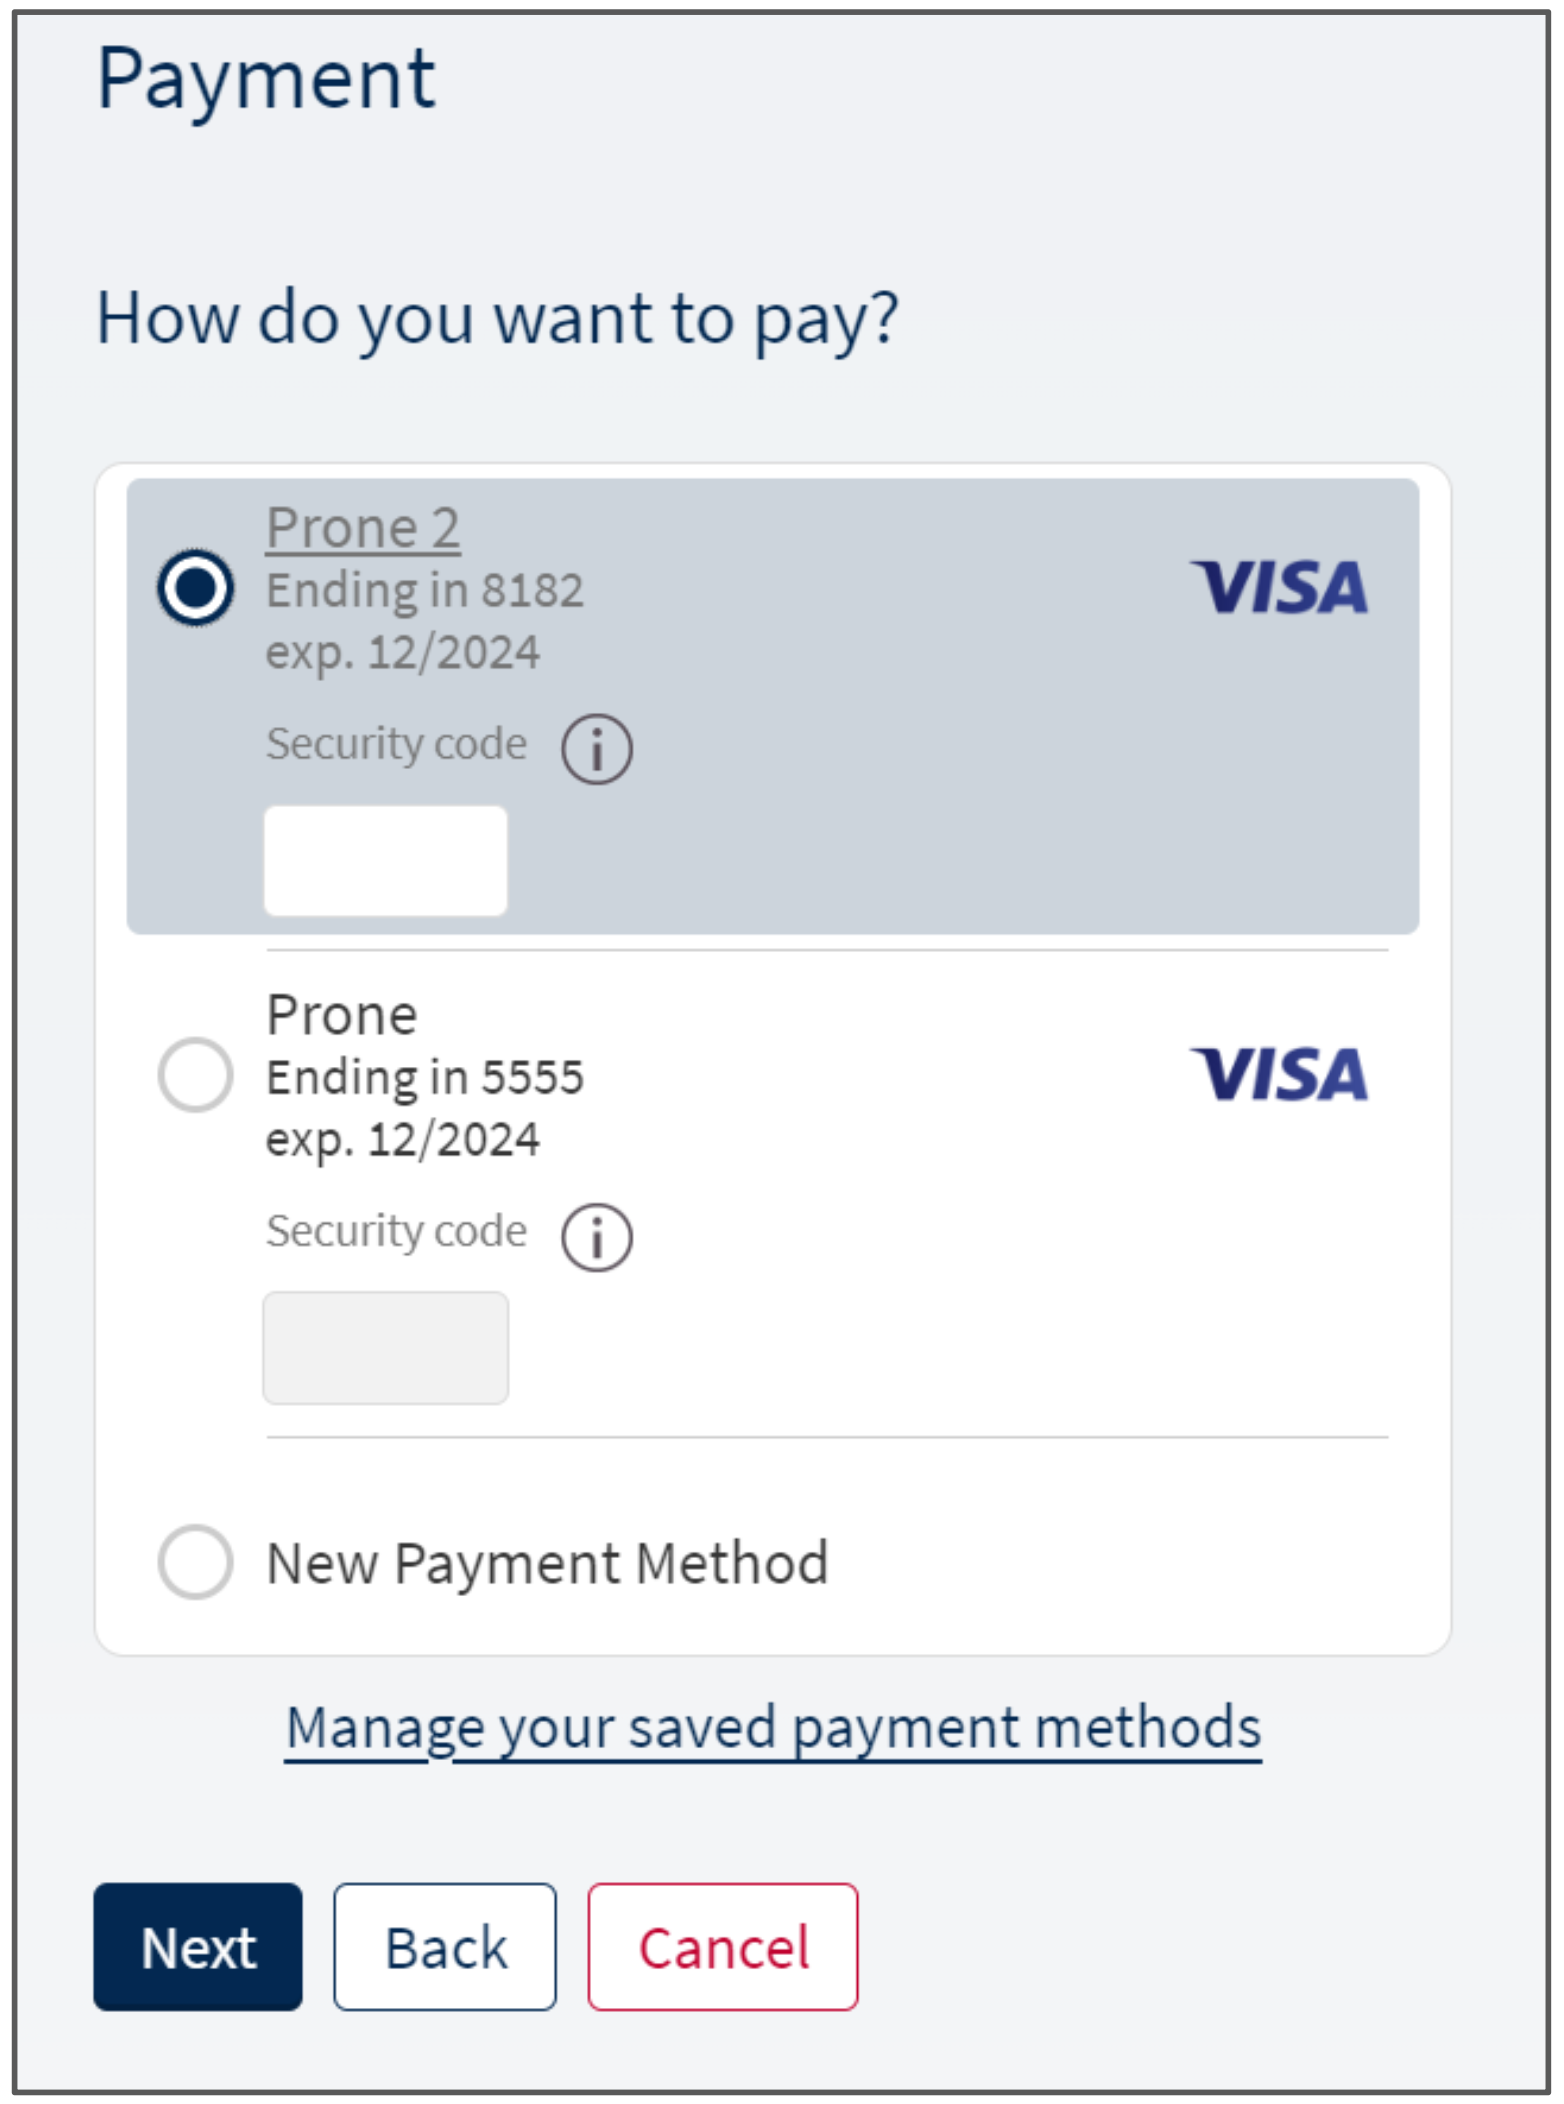 Select the Credit Card to charge payment to. Click Next.